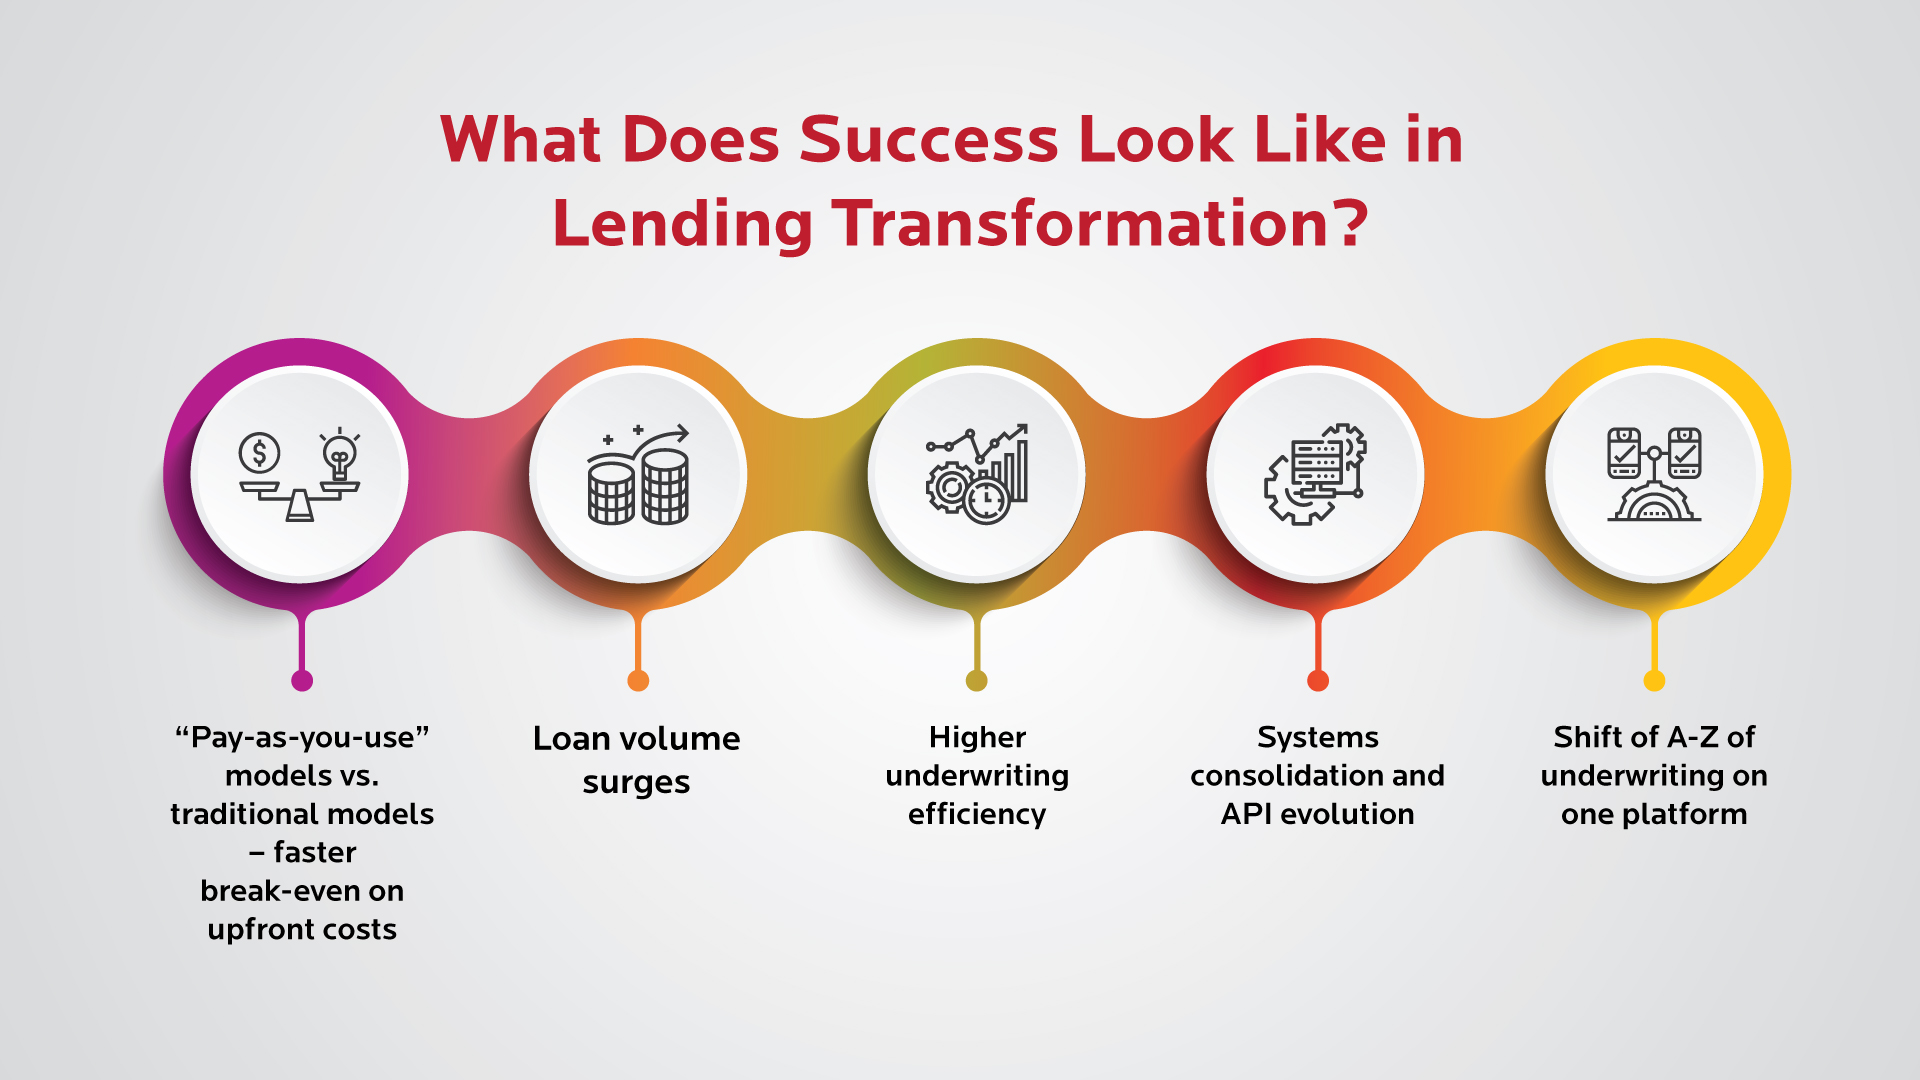 What Does Success Look Like in Lending Transformation